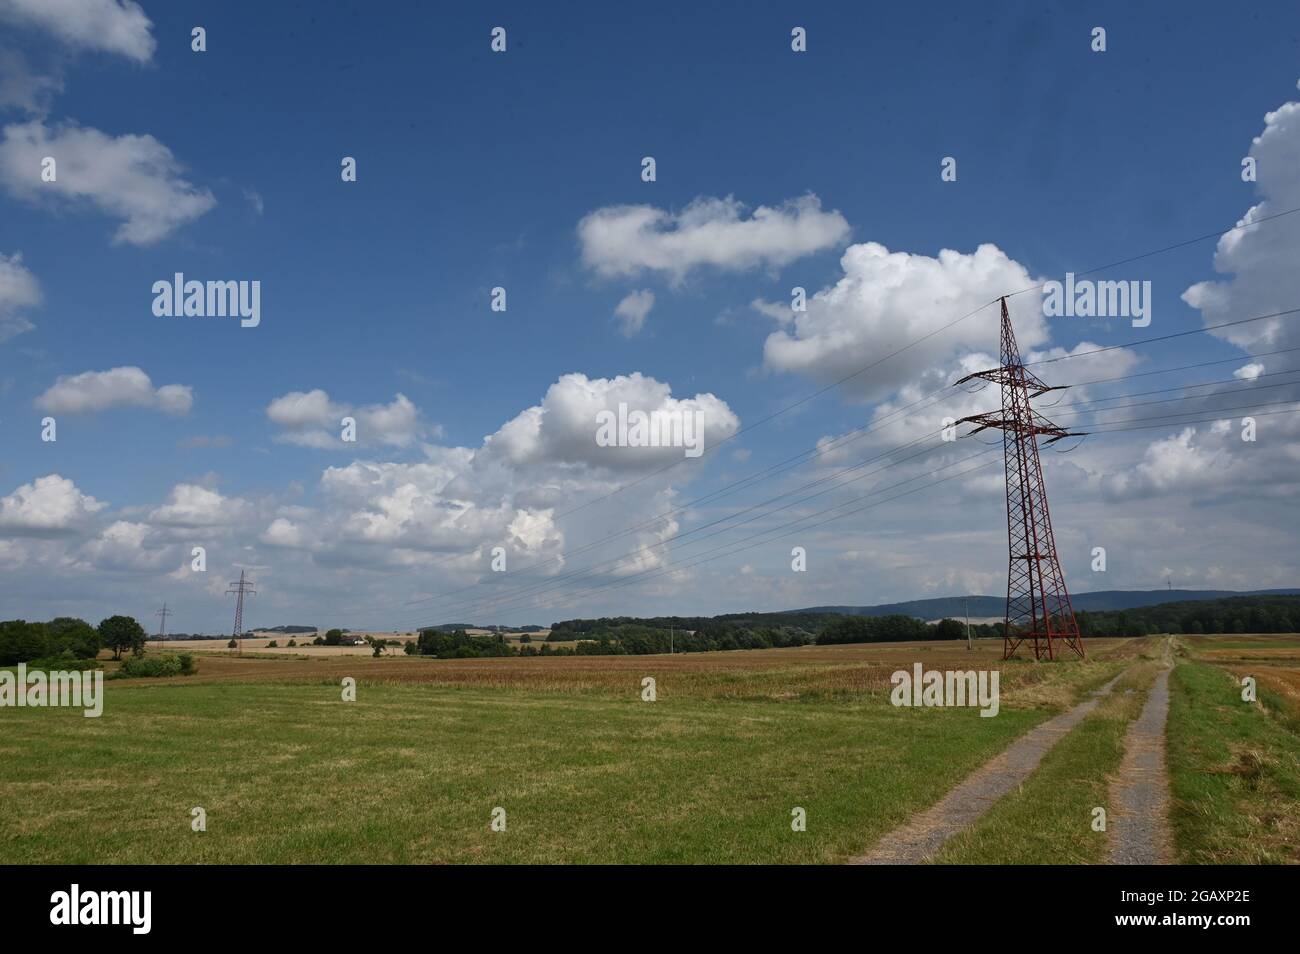 Summer landscape in Schaumburg with stubble field and power transmission line Stock Photo